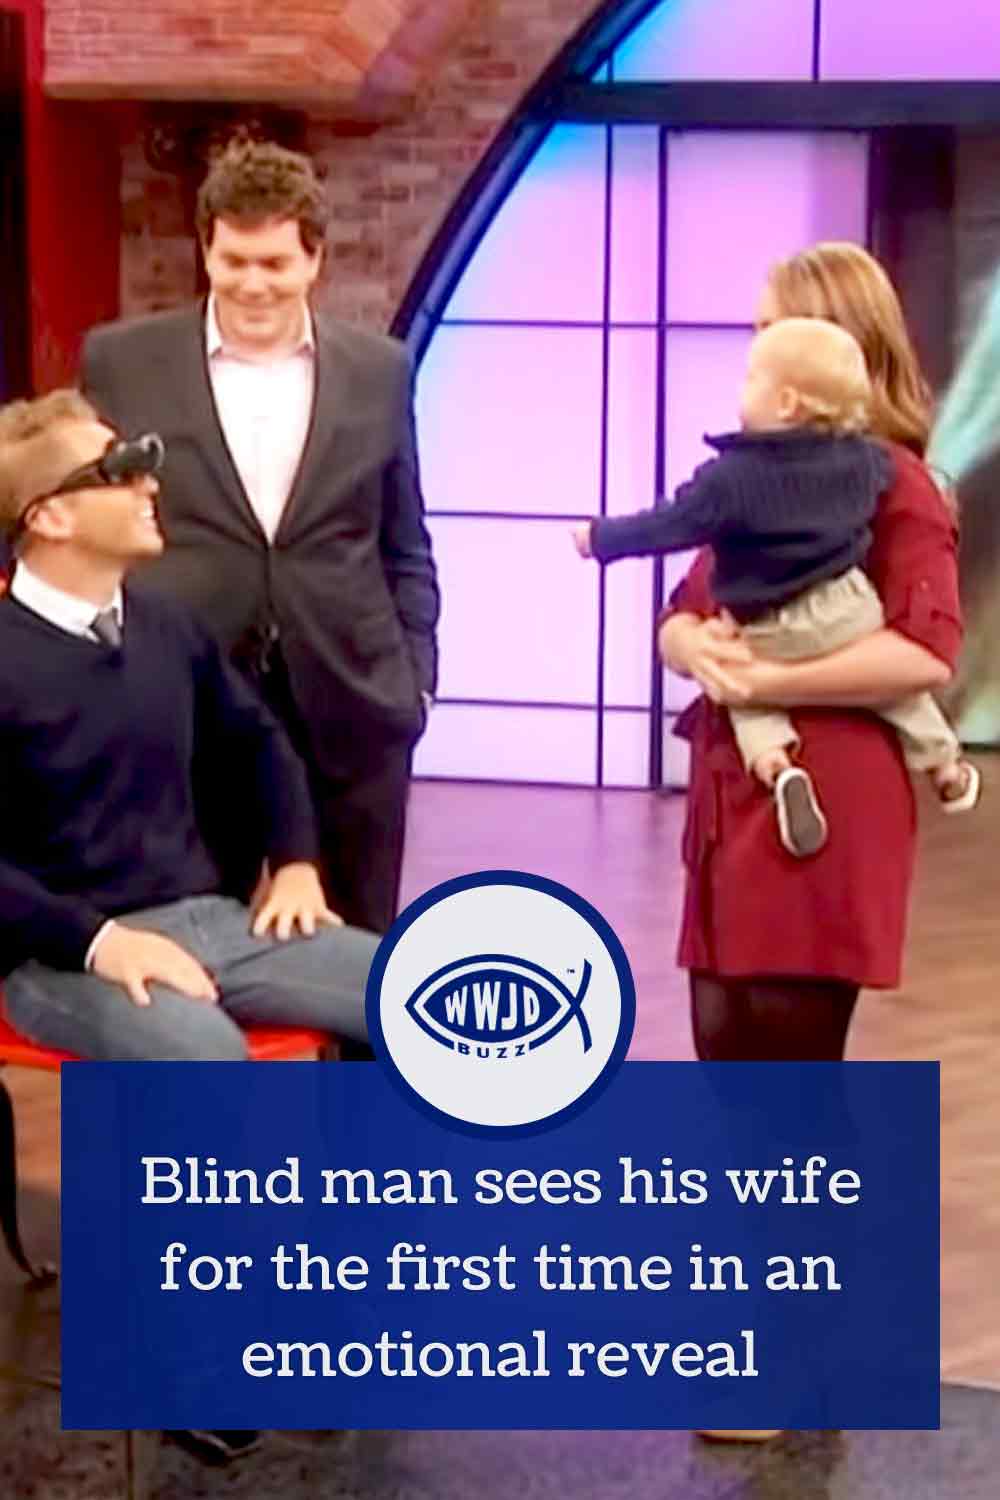 Blind man sees his wife for the first time in an emotional reveal